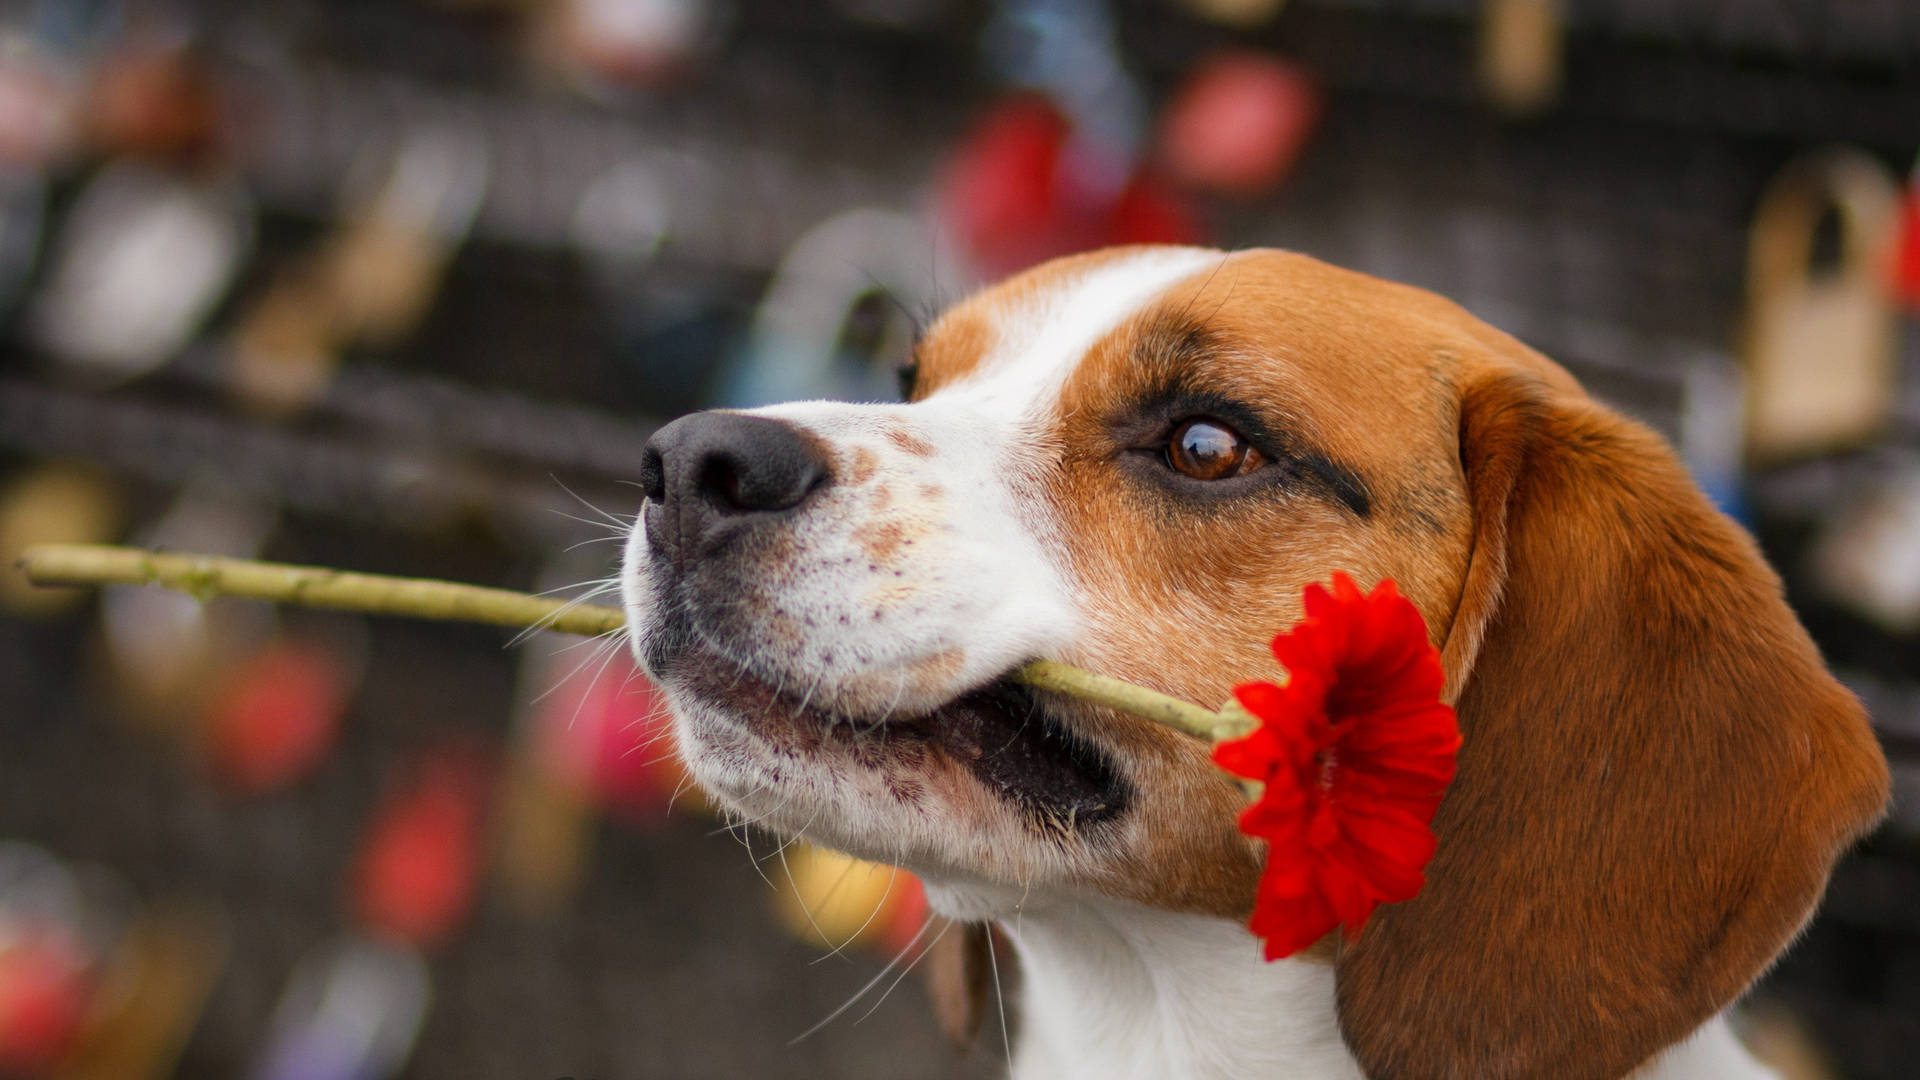 Cute Beagle Dog With Red Flower